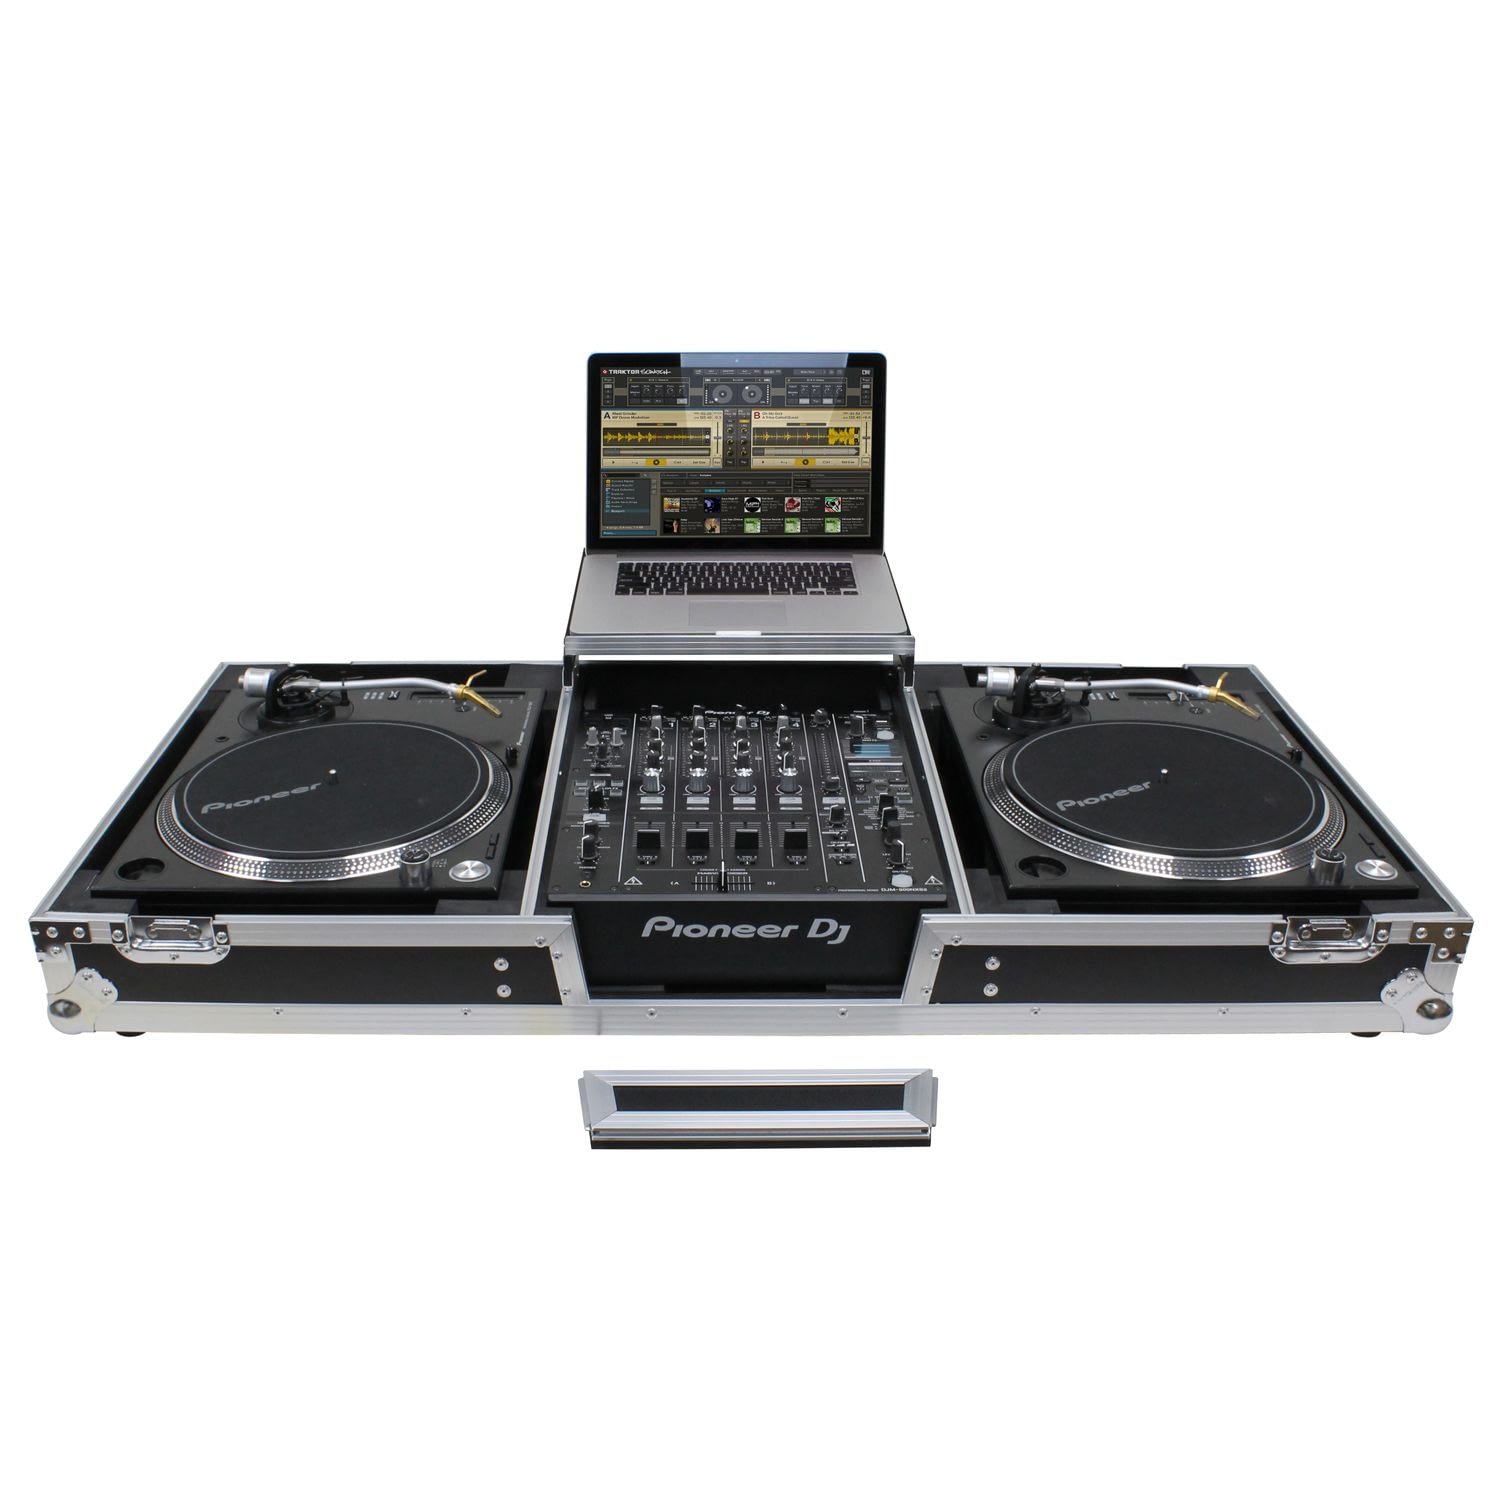 B-Stock: Odyssey FZGSLBM12WR DJ Flight Coffin Case for 12″ Format DJ Mixer and Two Battle Position Turntables Odyssey